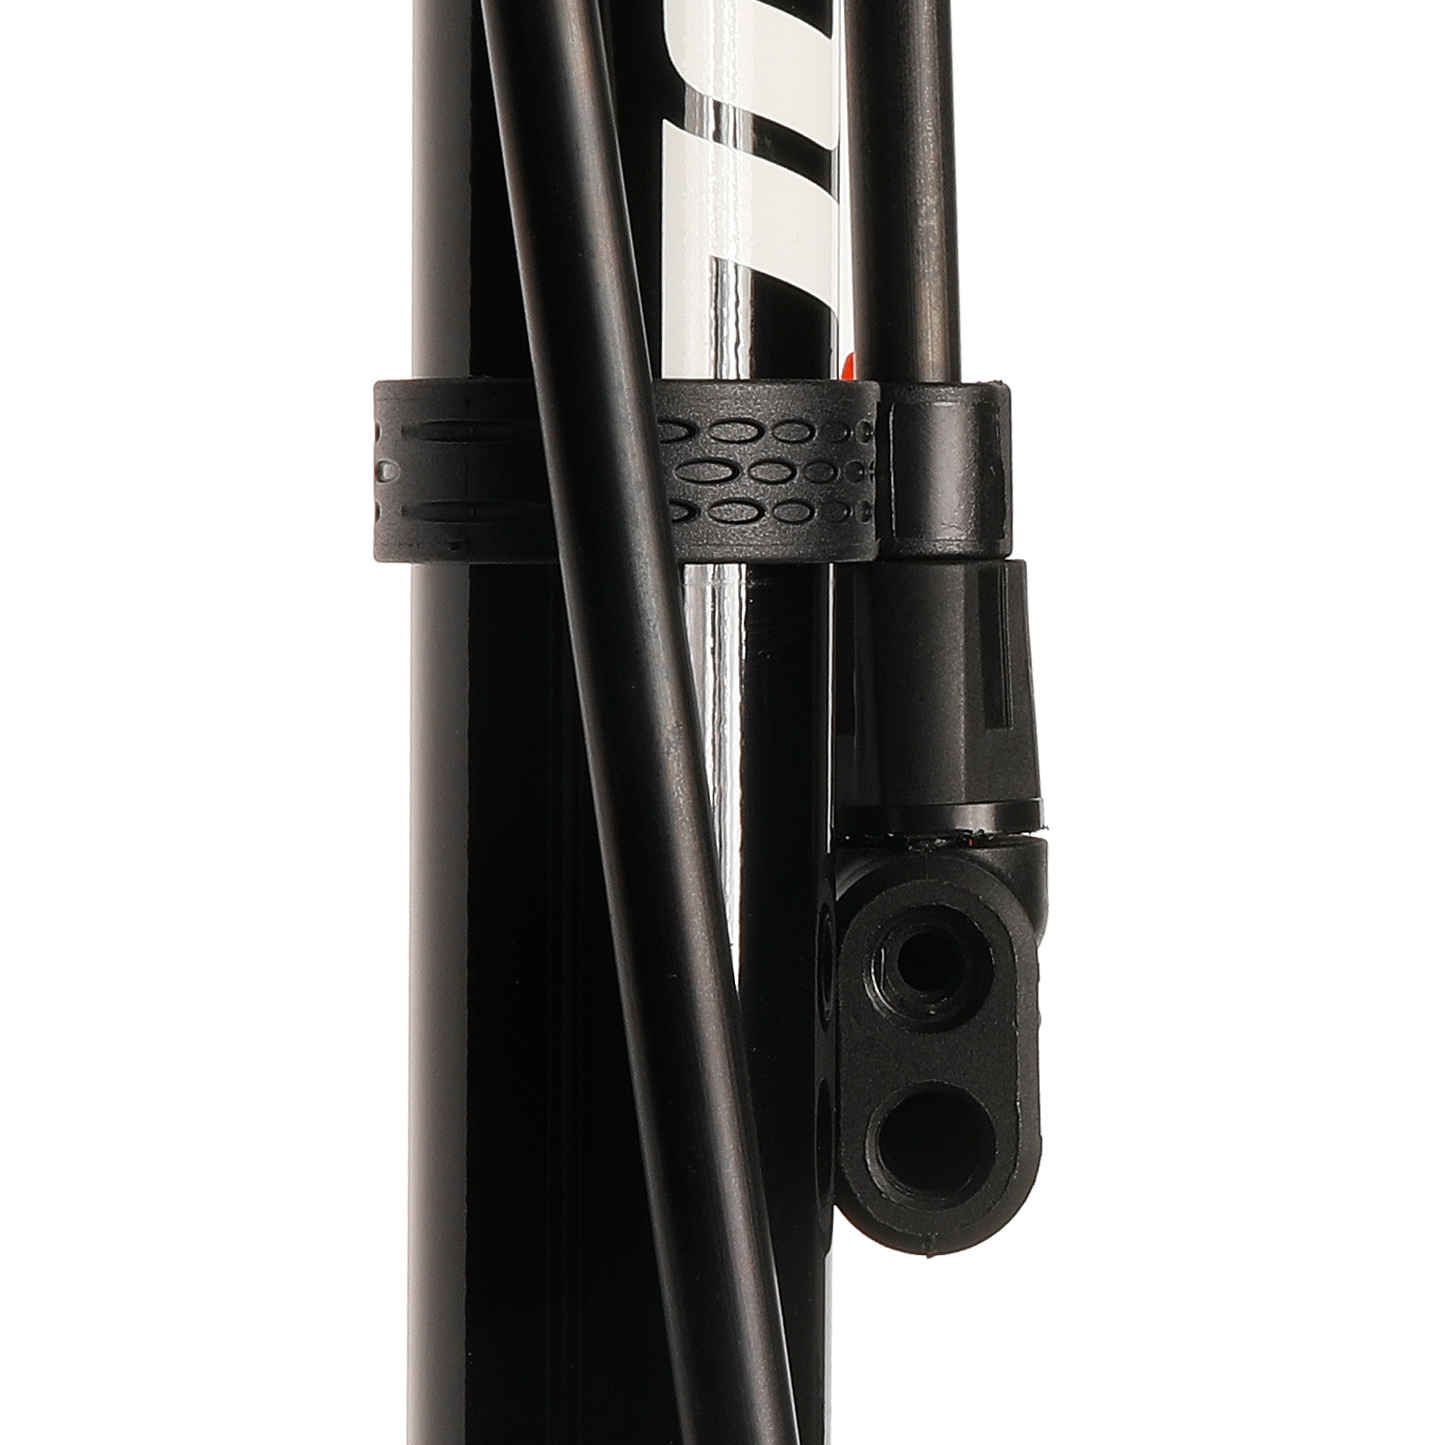 ZOL Pro High Pressure Bicycle Bike Floor Pump Up to 160PSI/11BAR with Gauge and Smart Head - Zol Cycling